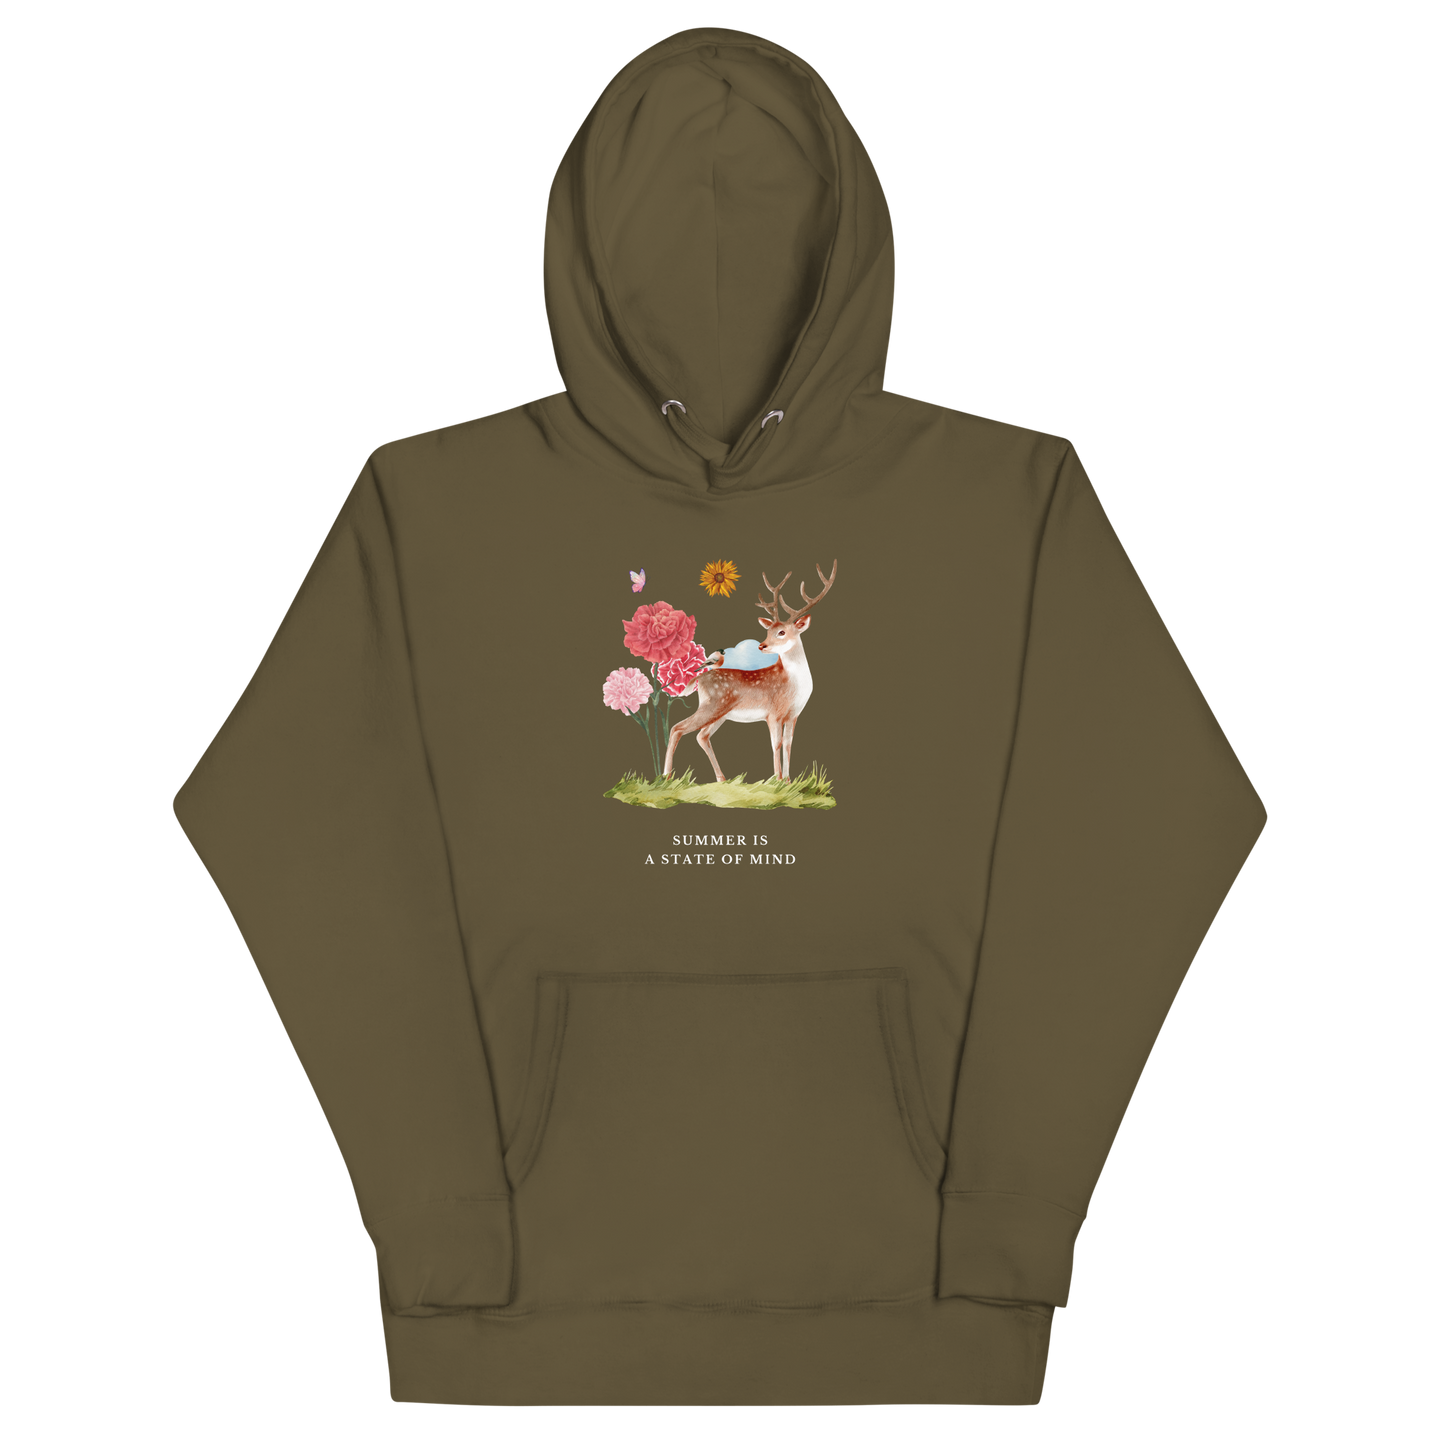 Military Green Premium Summer Is a State of Mind Hoodie showcasing a Summer Is a State of Mind graphic on the chest - Cute Graphic Summer Hoodies - Boozy Fox